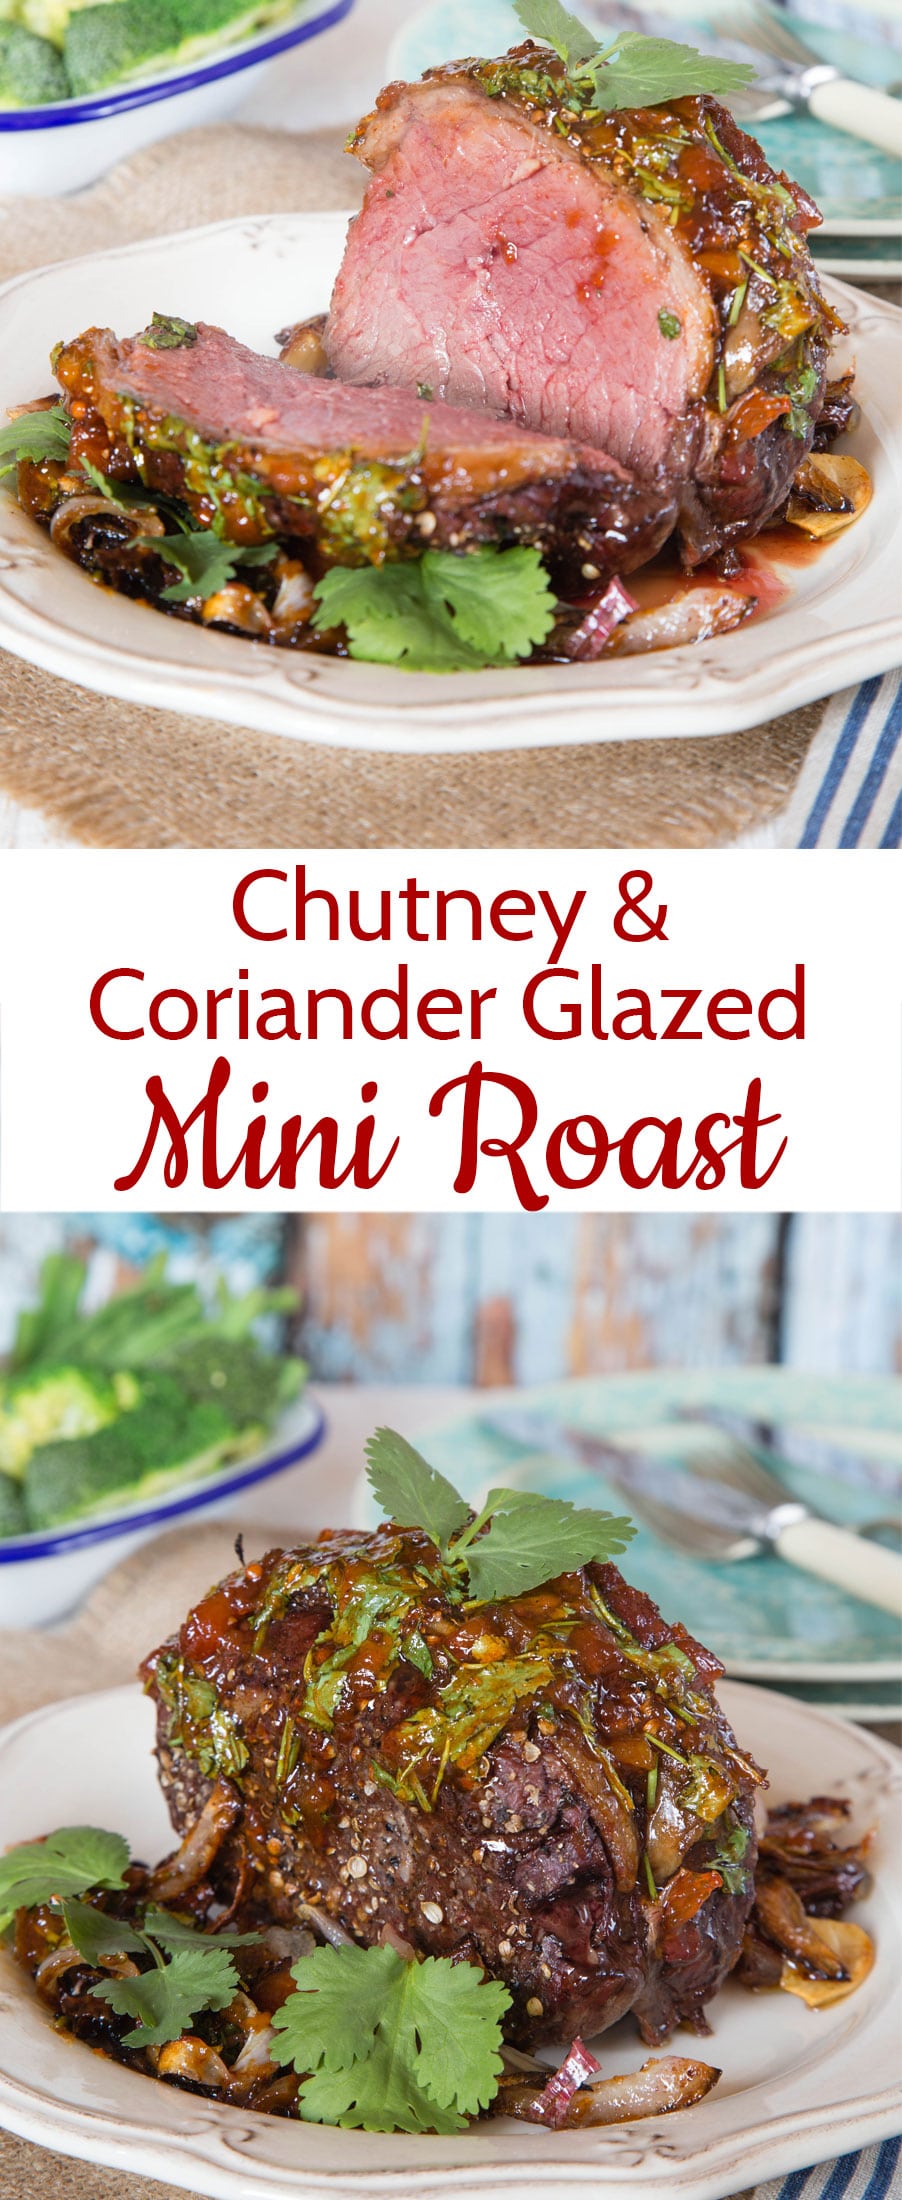 This quick cook mini roast is glazed with coriander and chutney and is perfect for mid-week dining